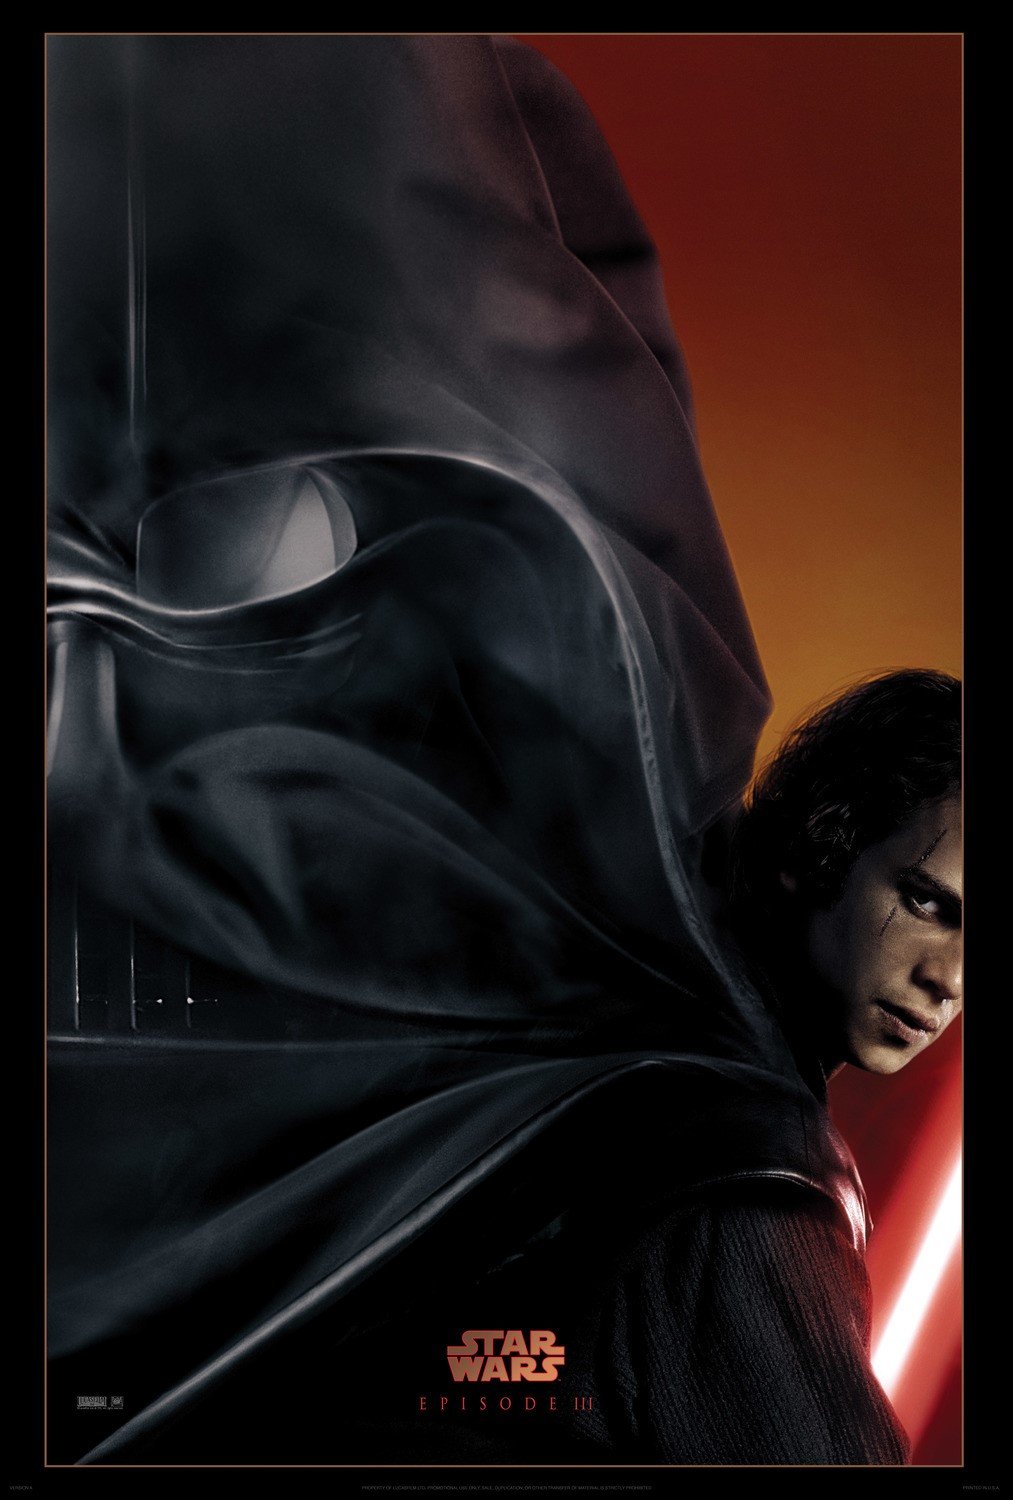 Star Wars REVENGE OF THE SITH original 27x40 DS advance movie poster 2005